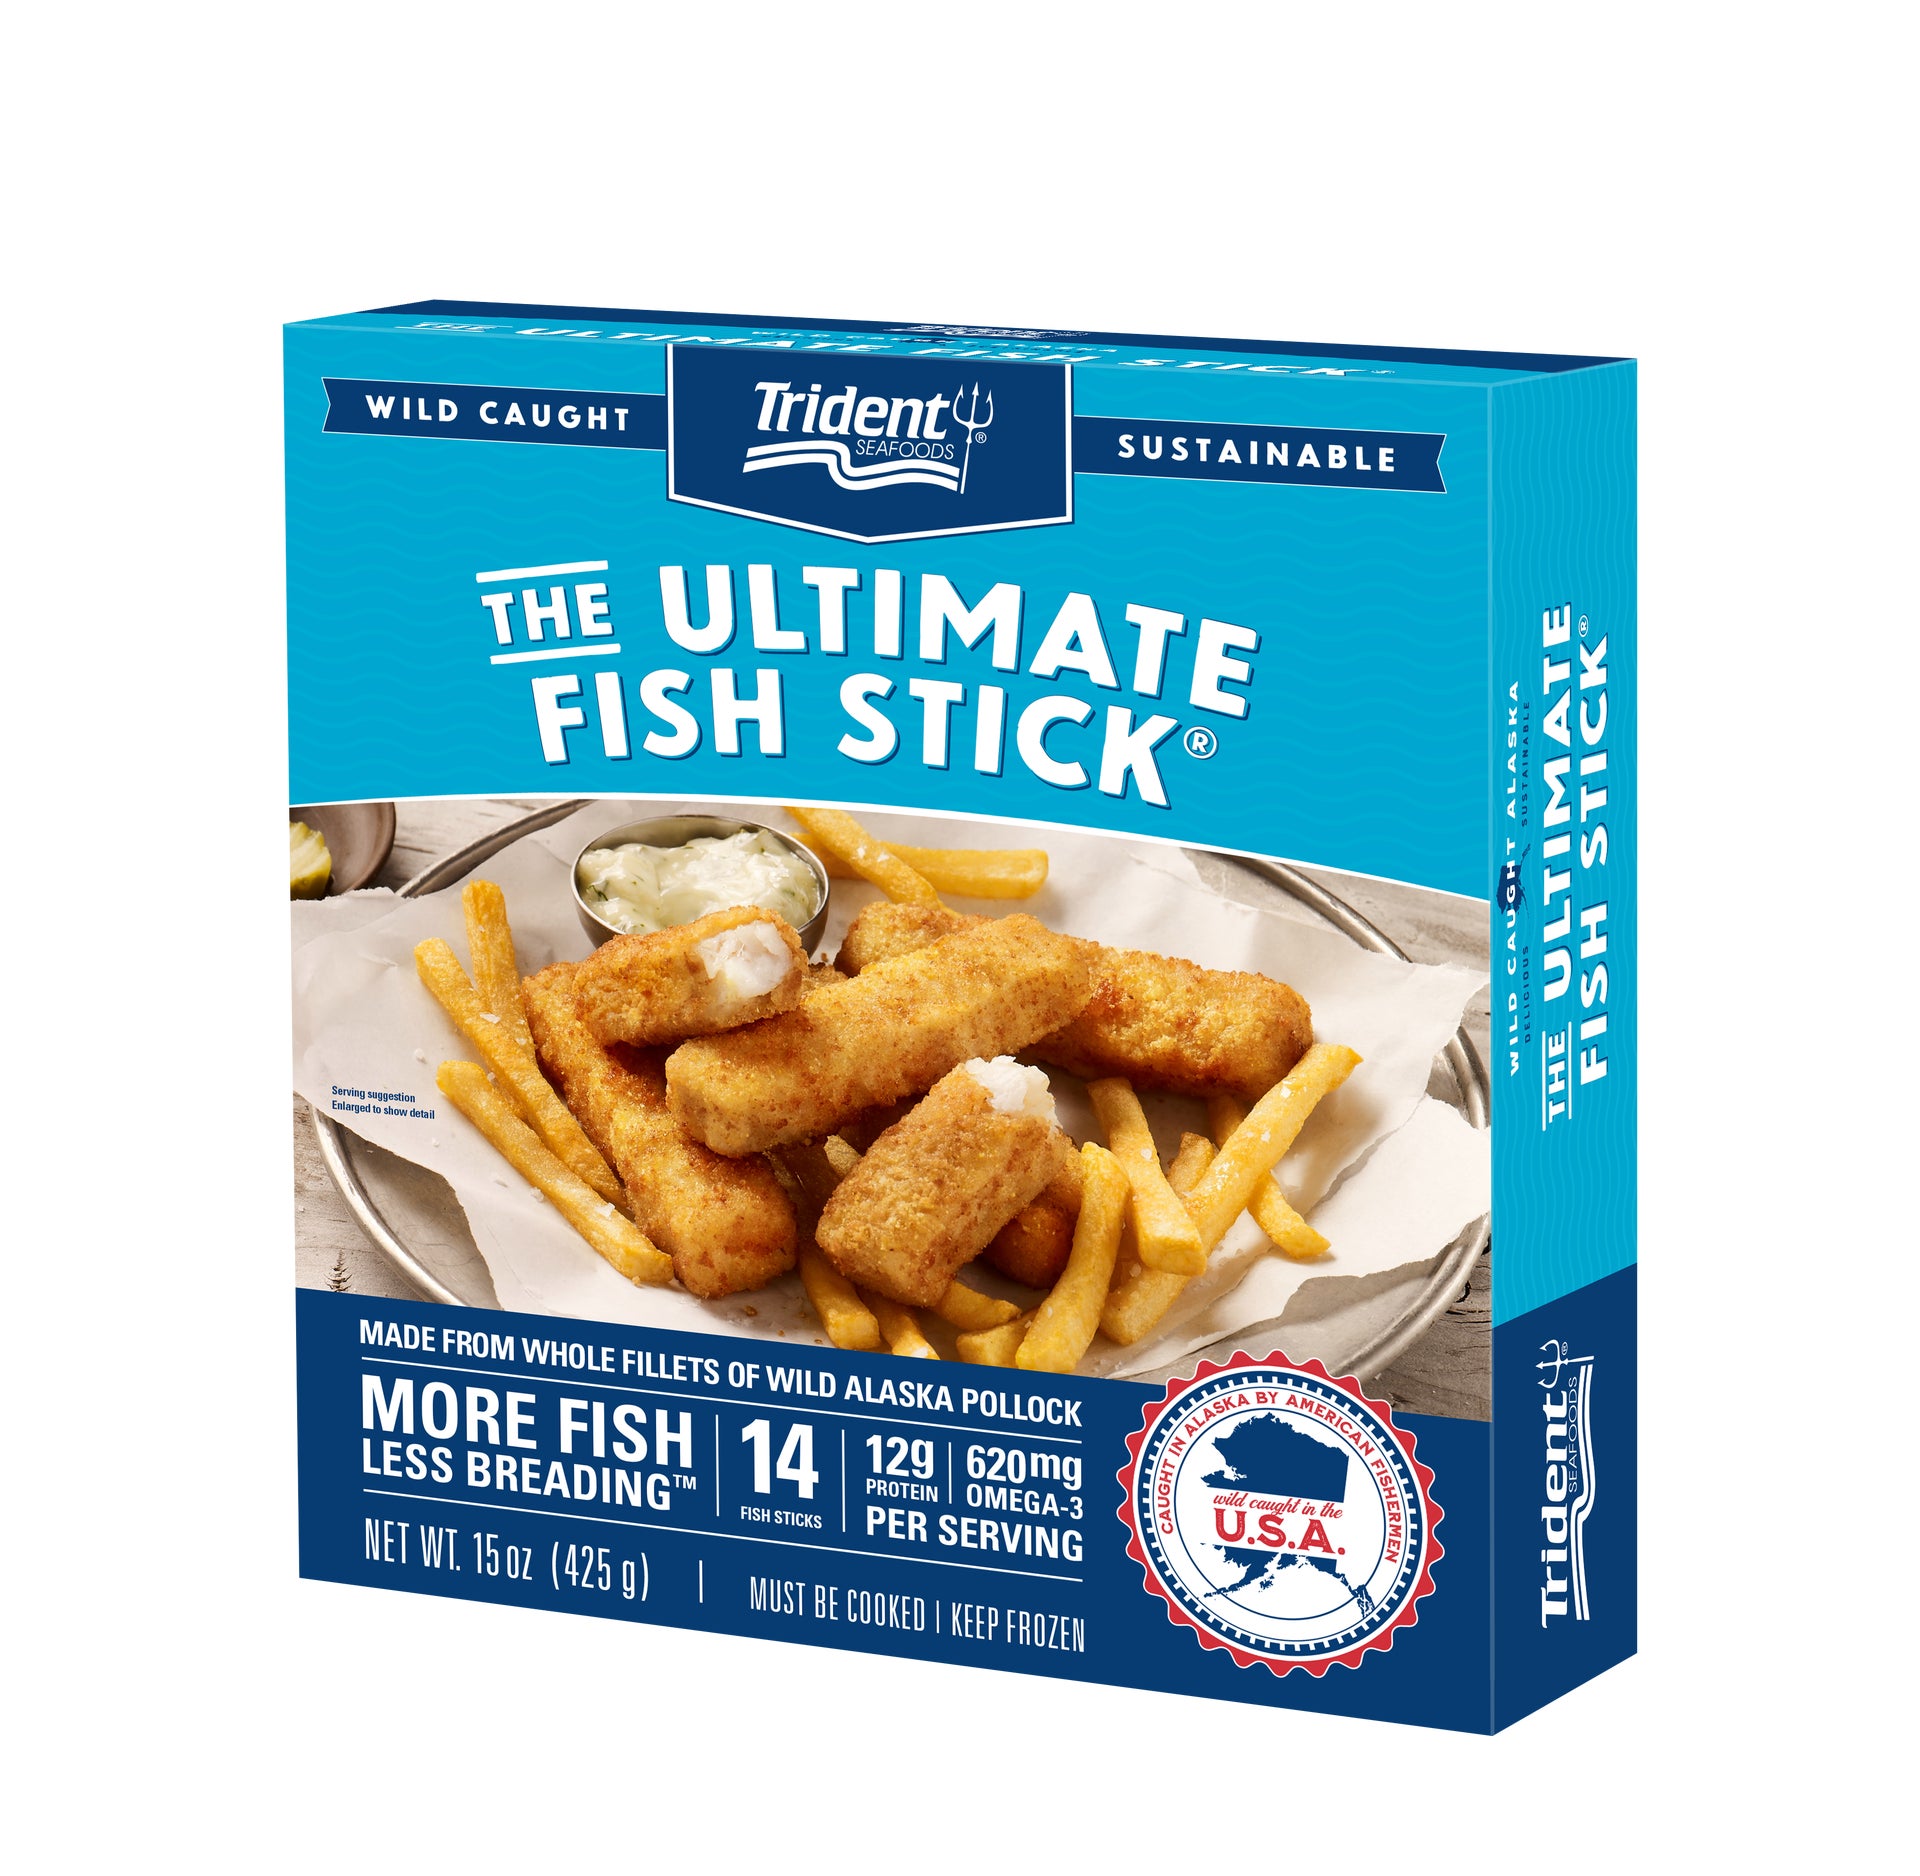 The Ultimate Fish Stick® Packaging